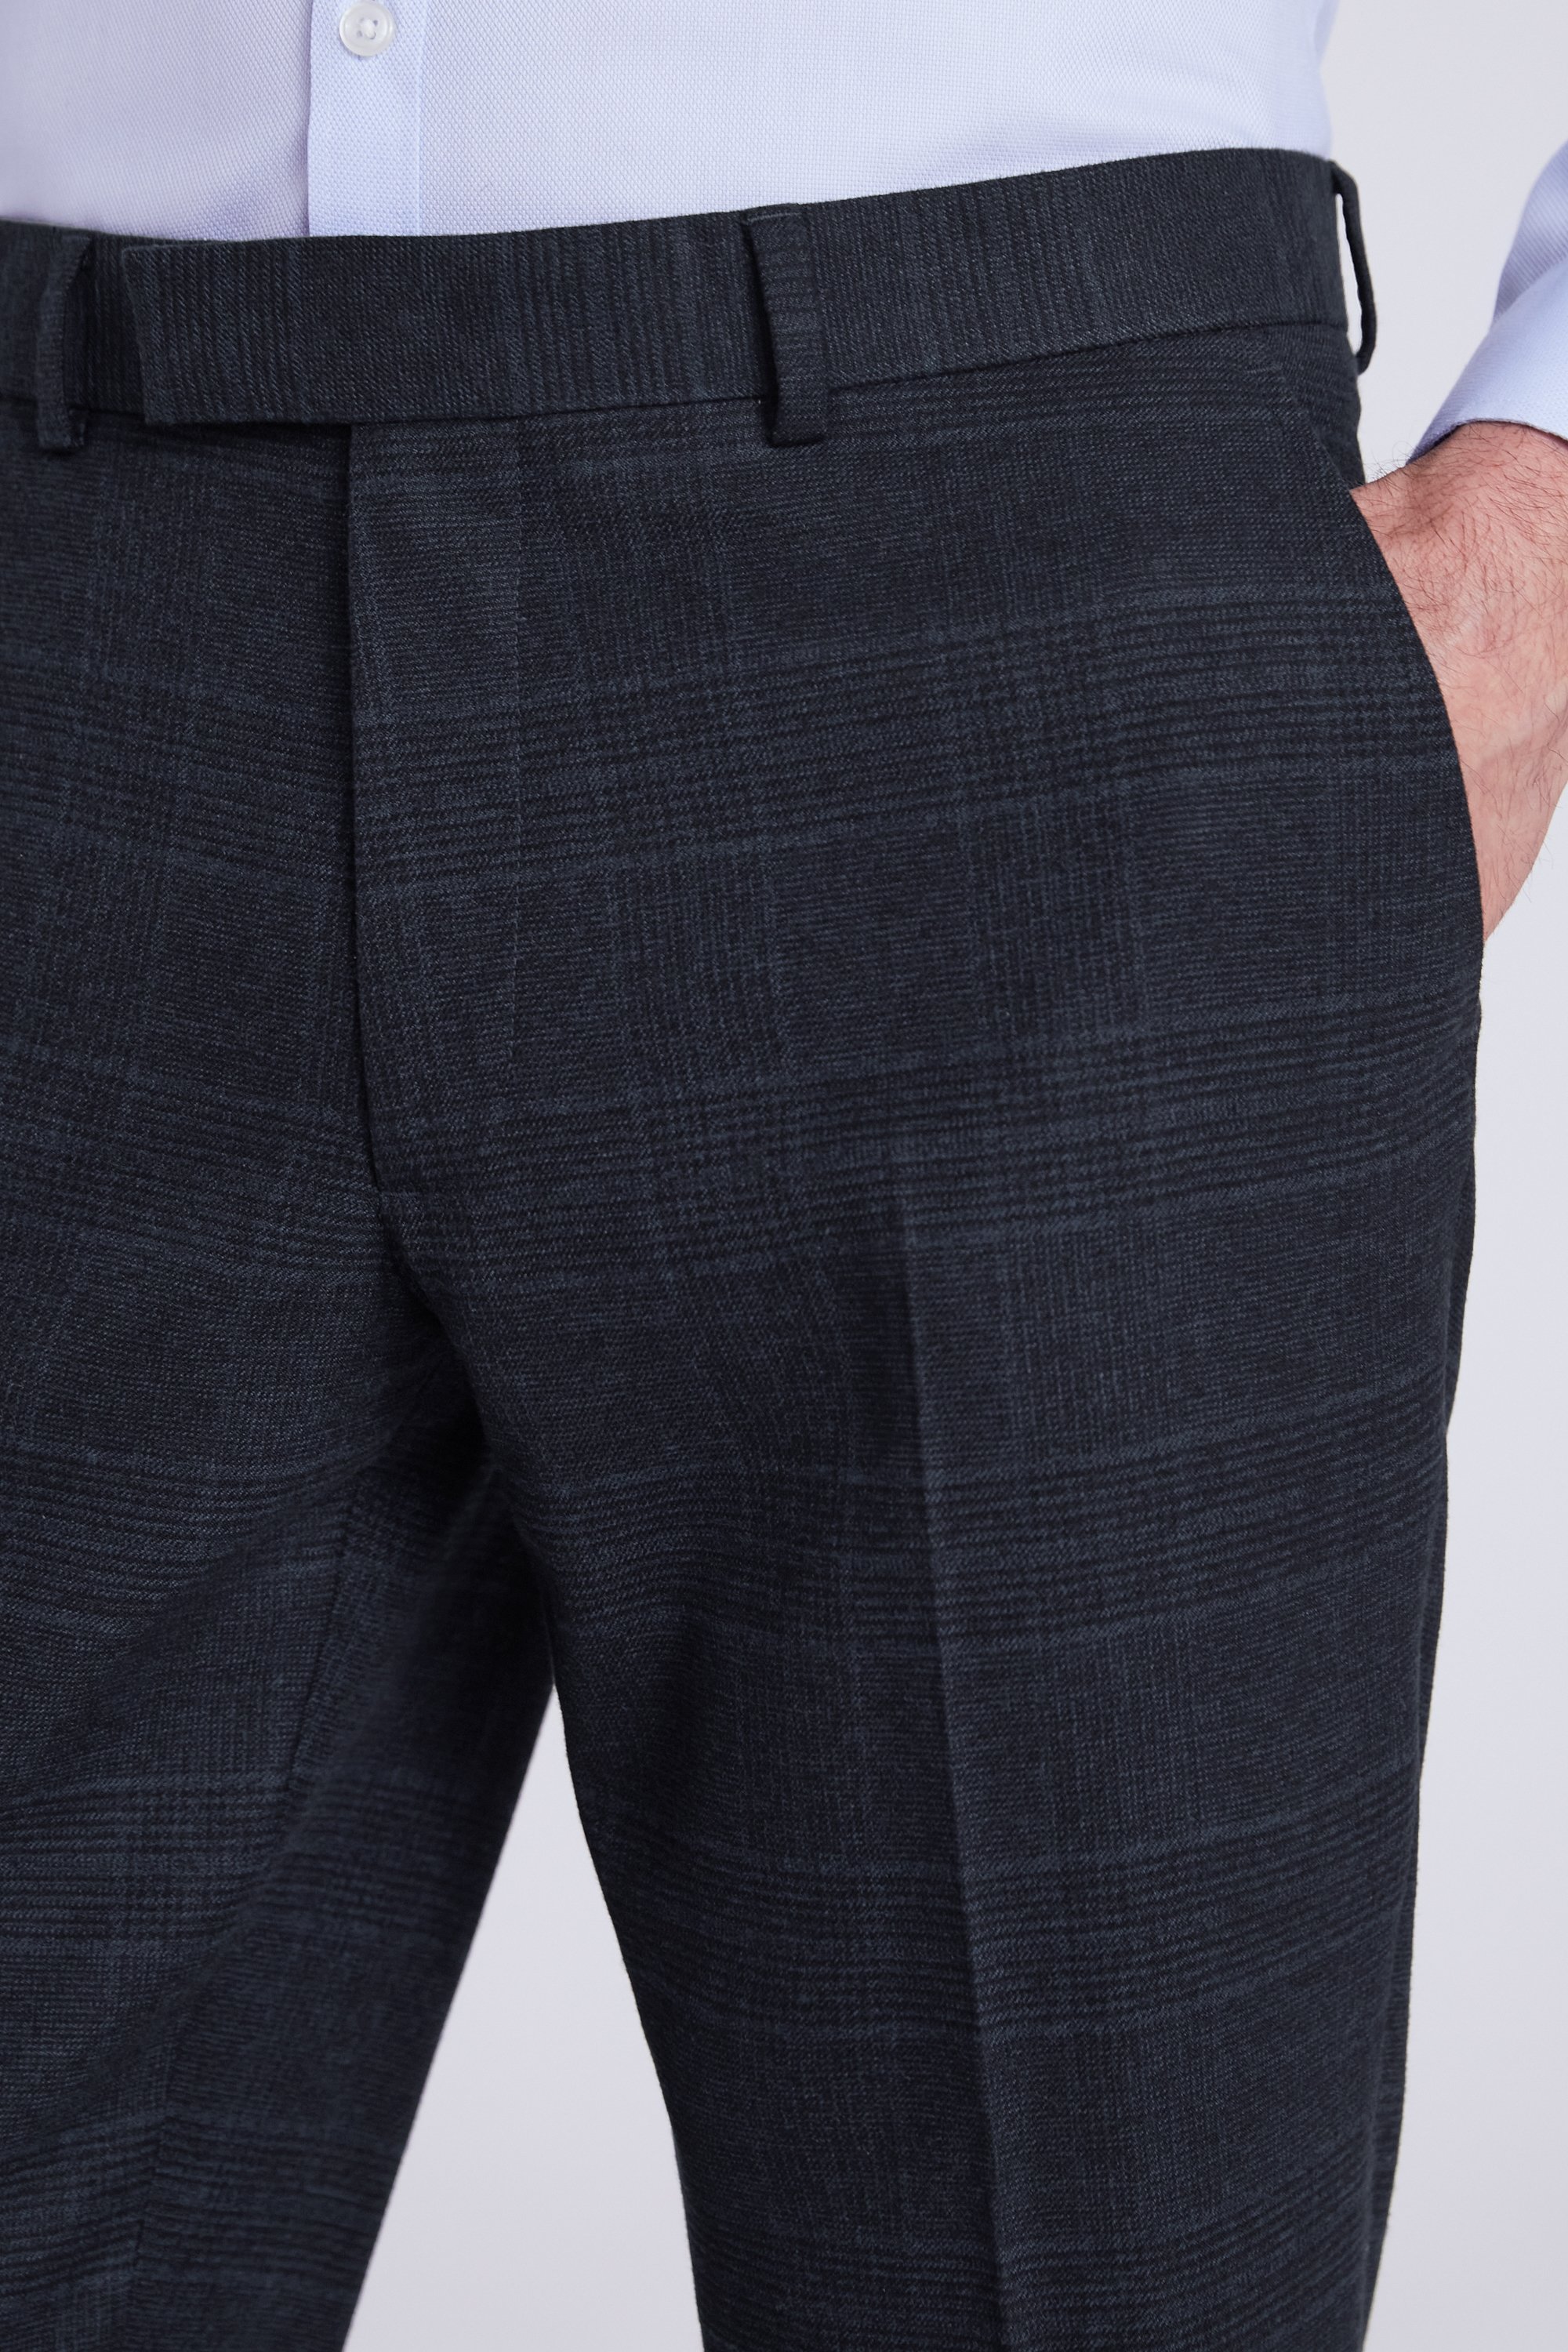 Slim Fit eco Ink Check Trousers | Buy Online at Moss